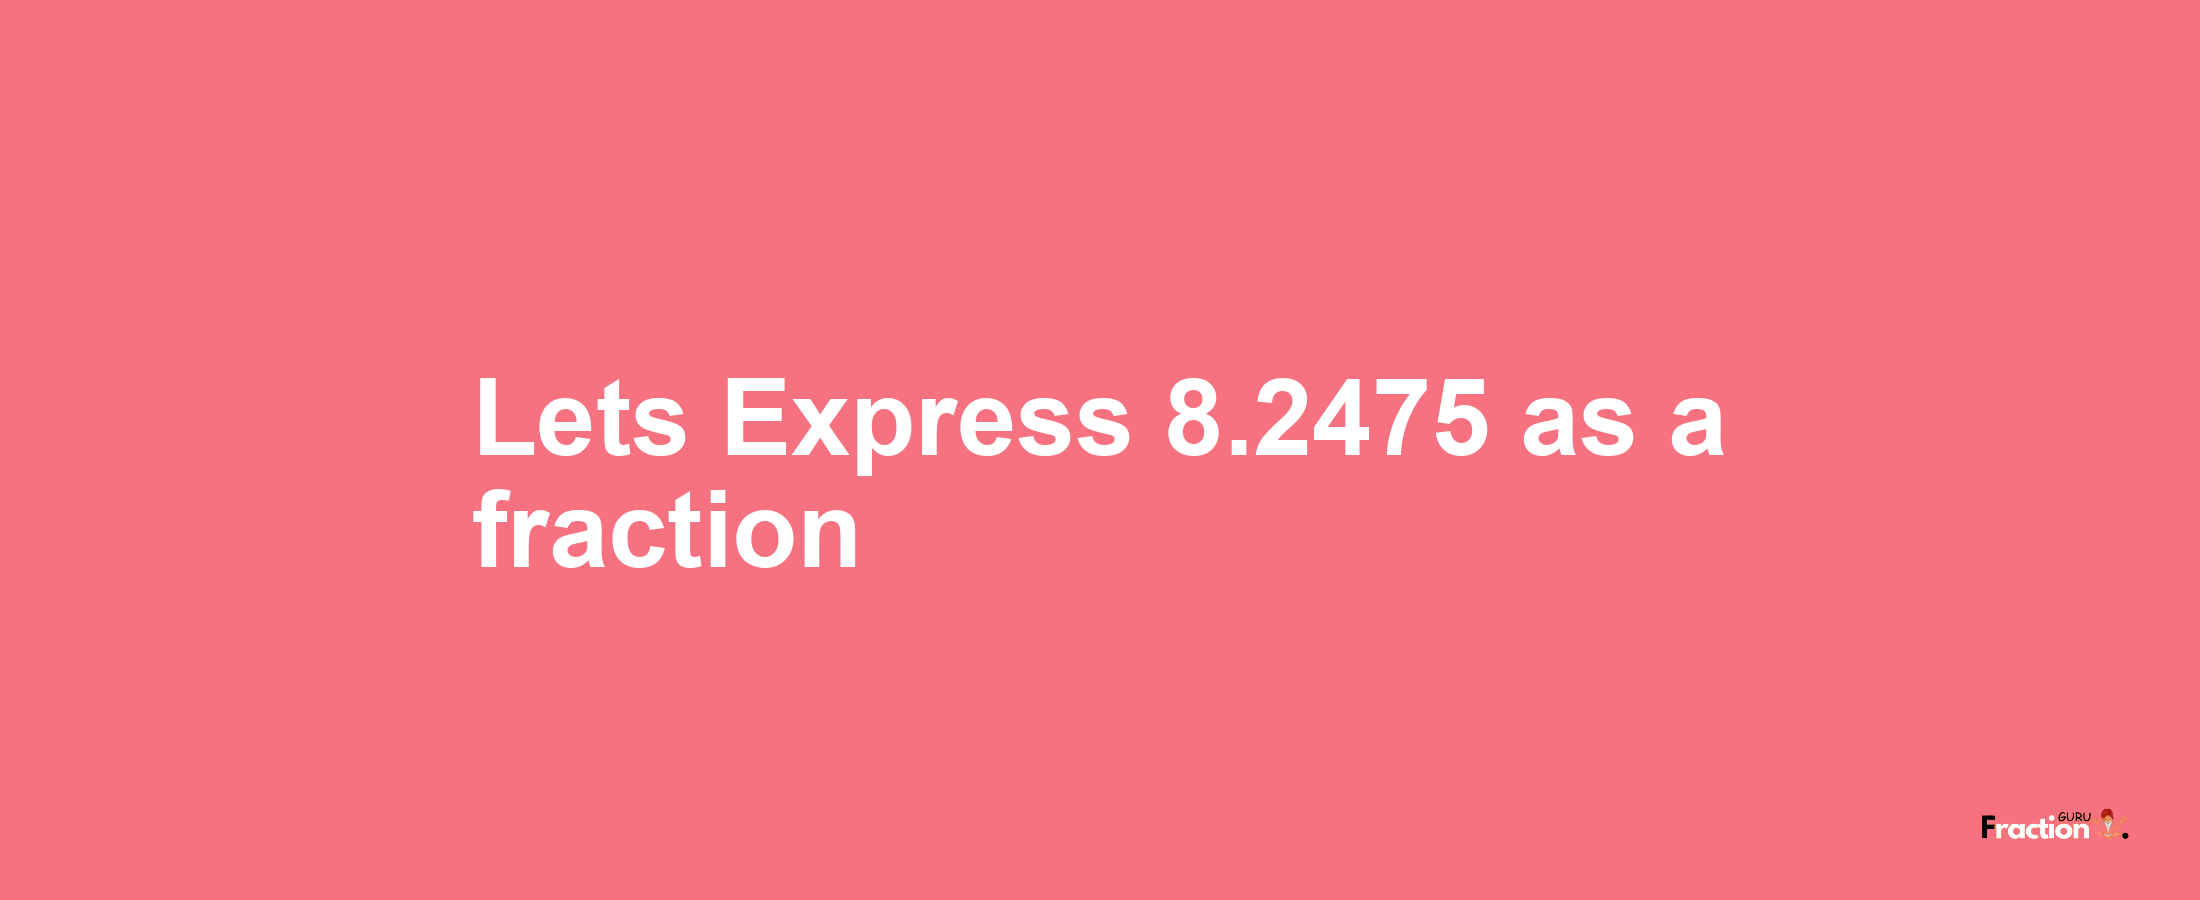 Lets Express 8.2475 as afraction